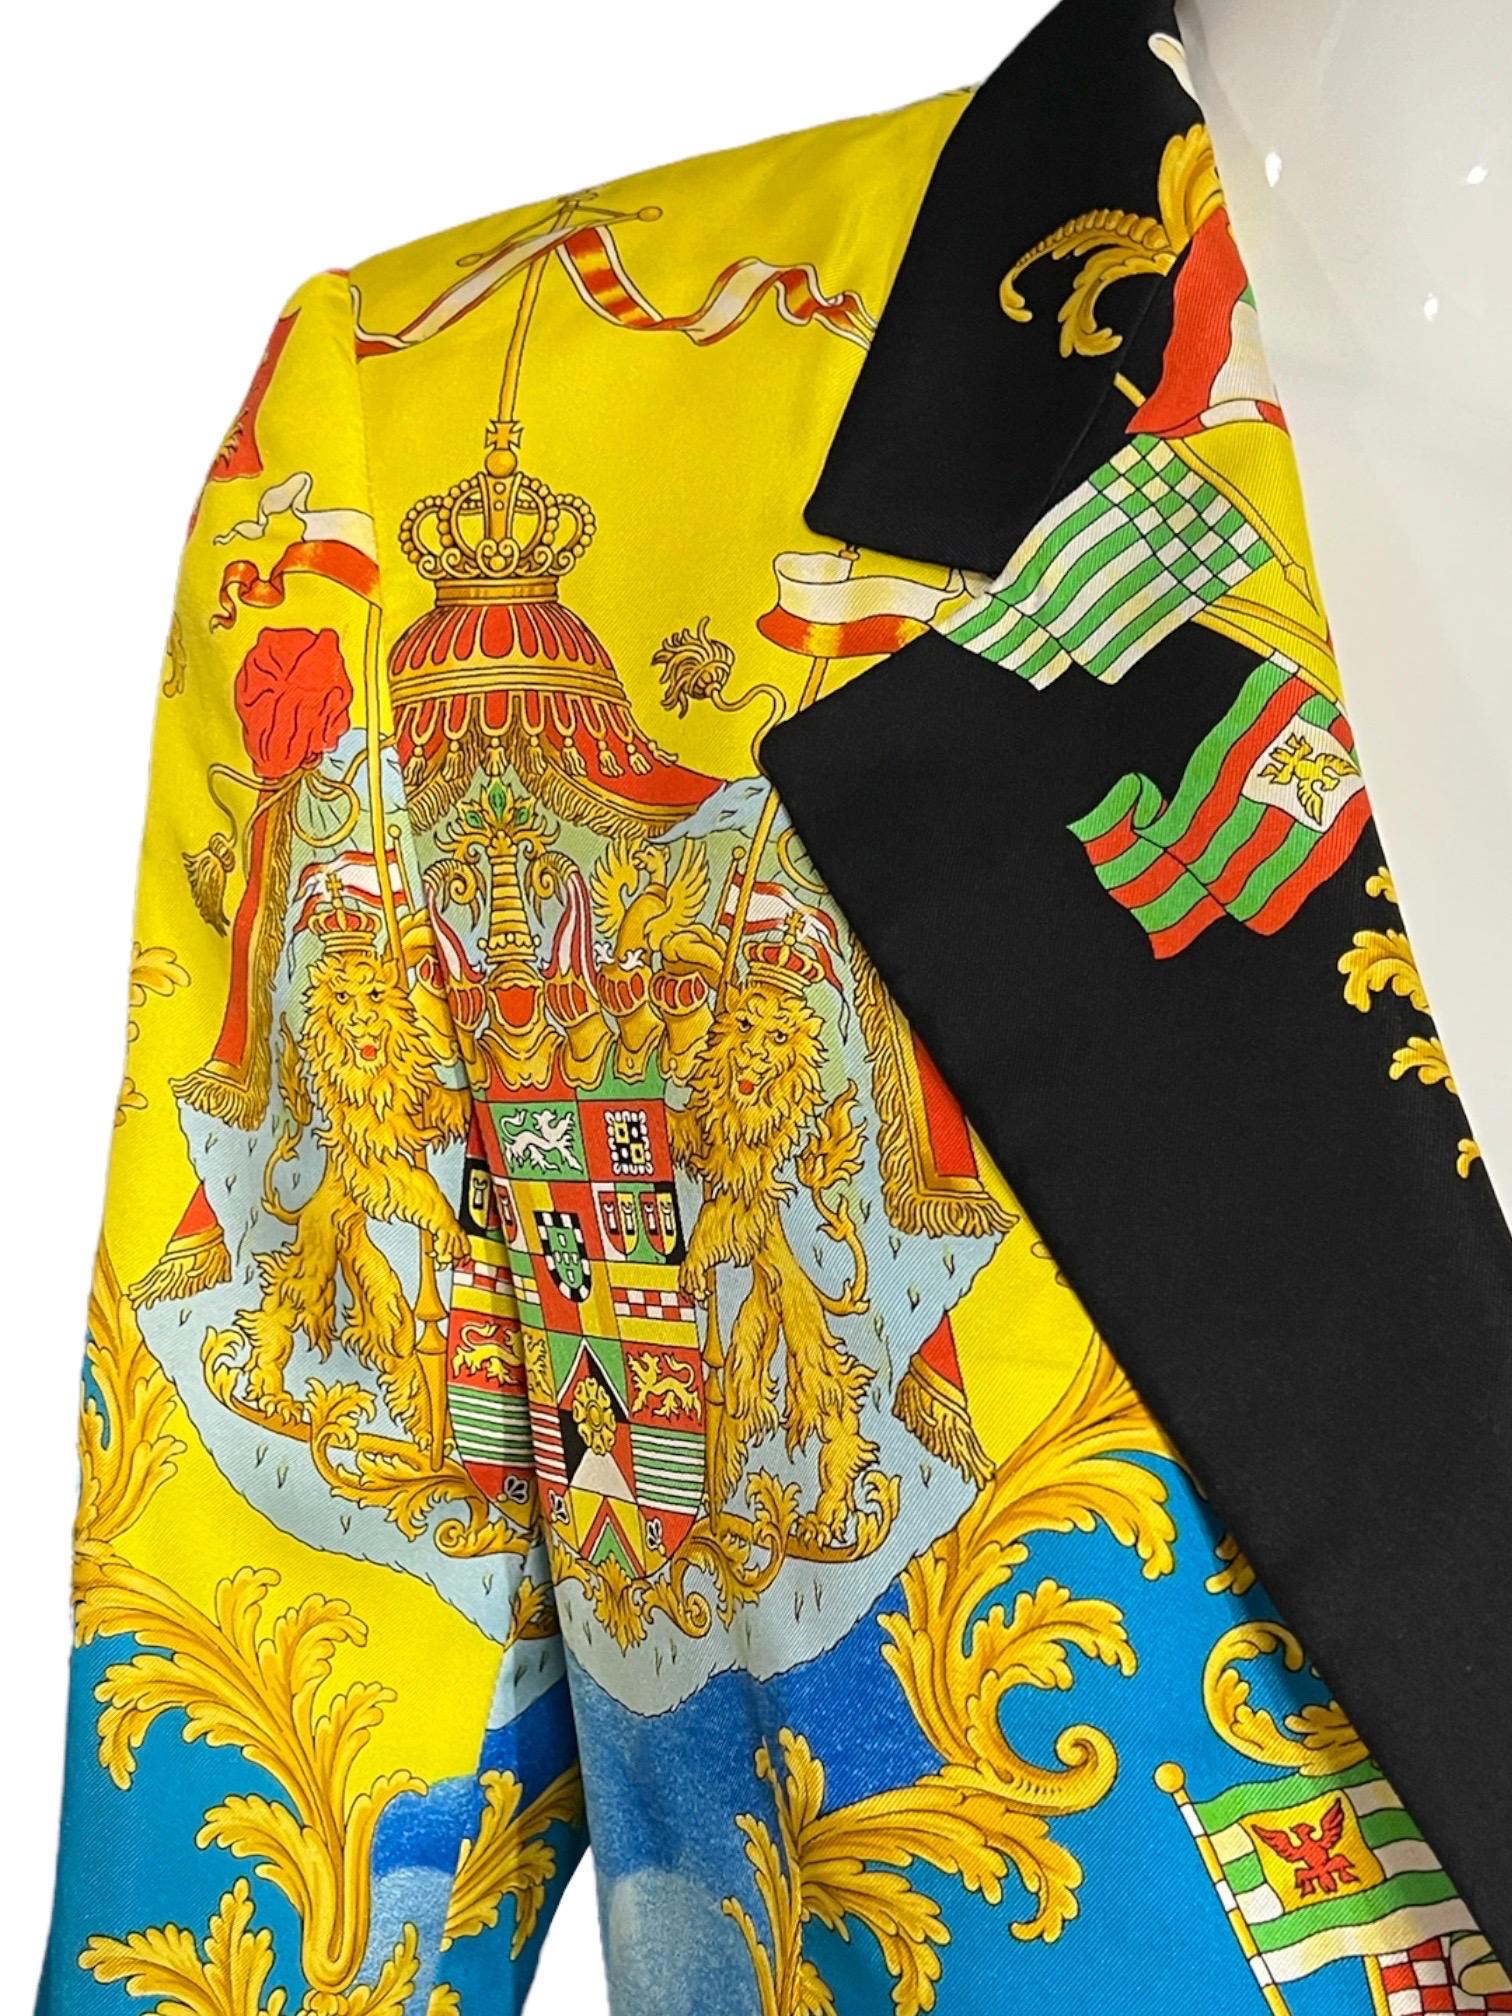 S/S 1993 Gianni Versace Baroque Flags Silk Blazer Jacket Miami Collection  For Sale 2